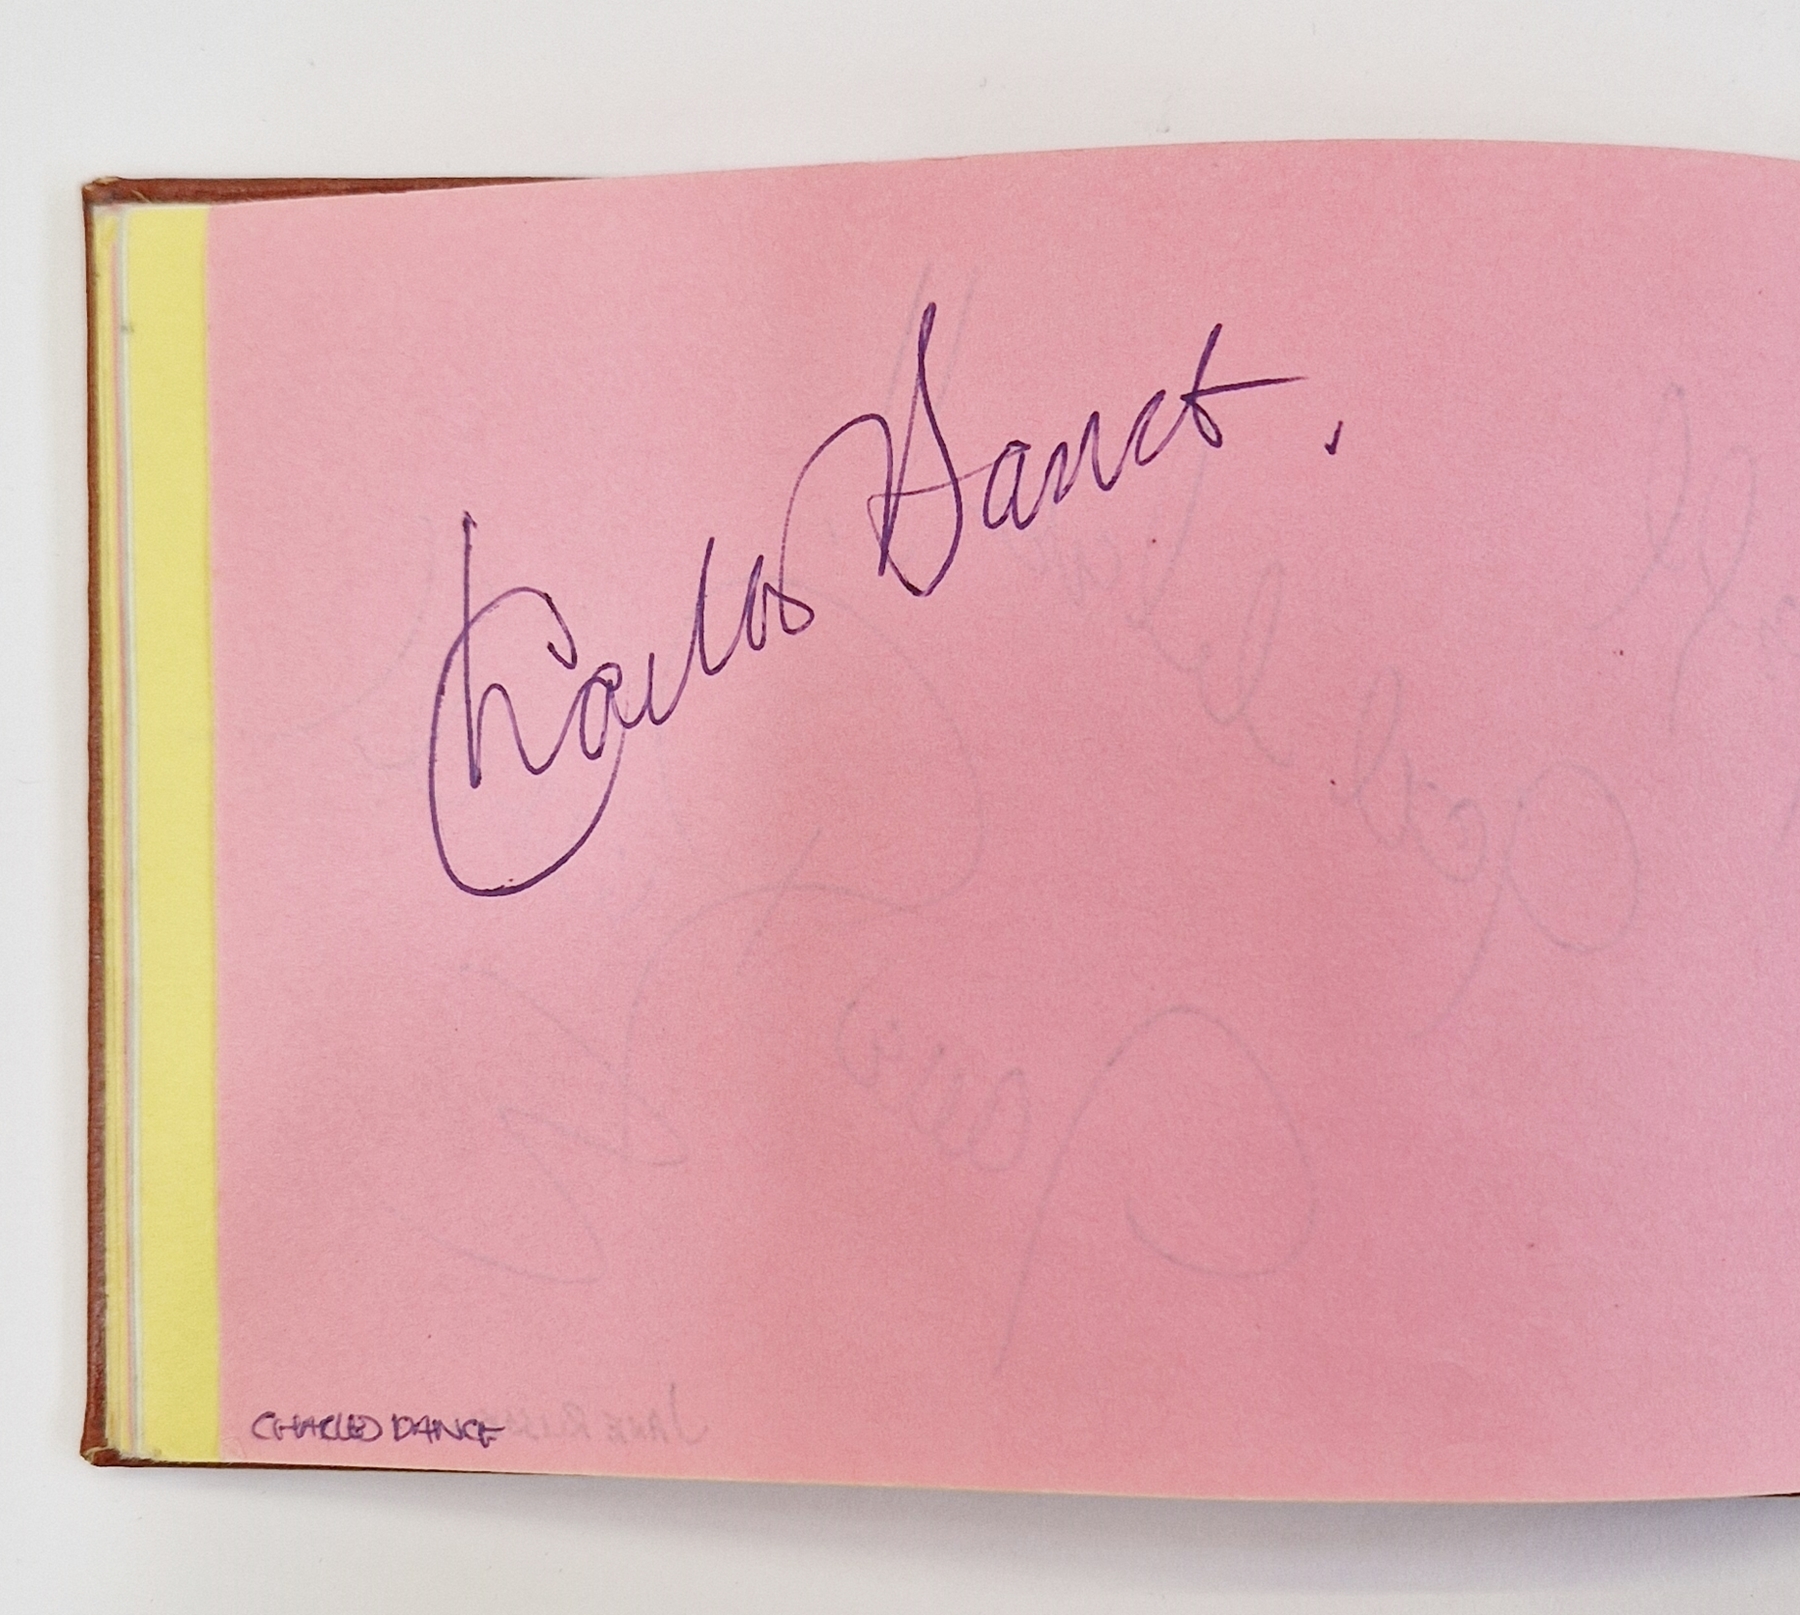 Autograph album, 20th century, to include actors, singers and other celebrities, including Elton - Image 12 of 20